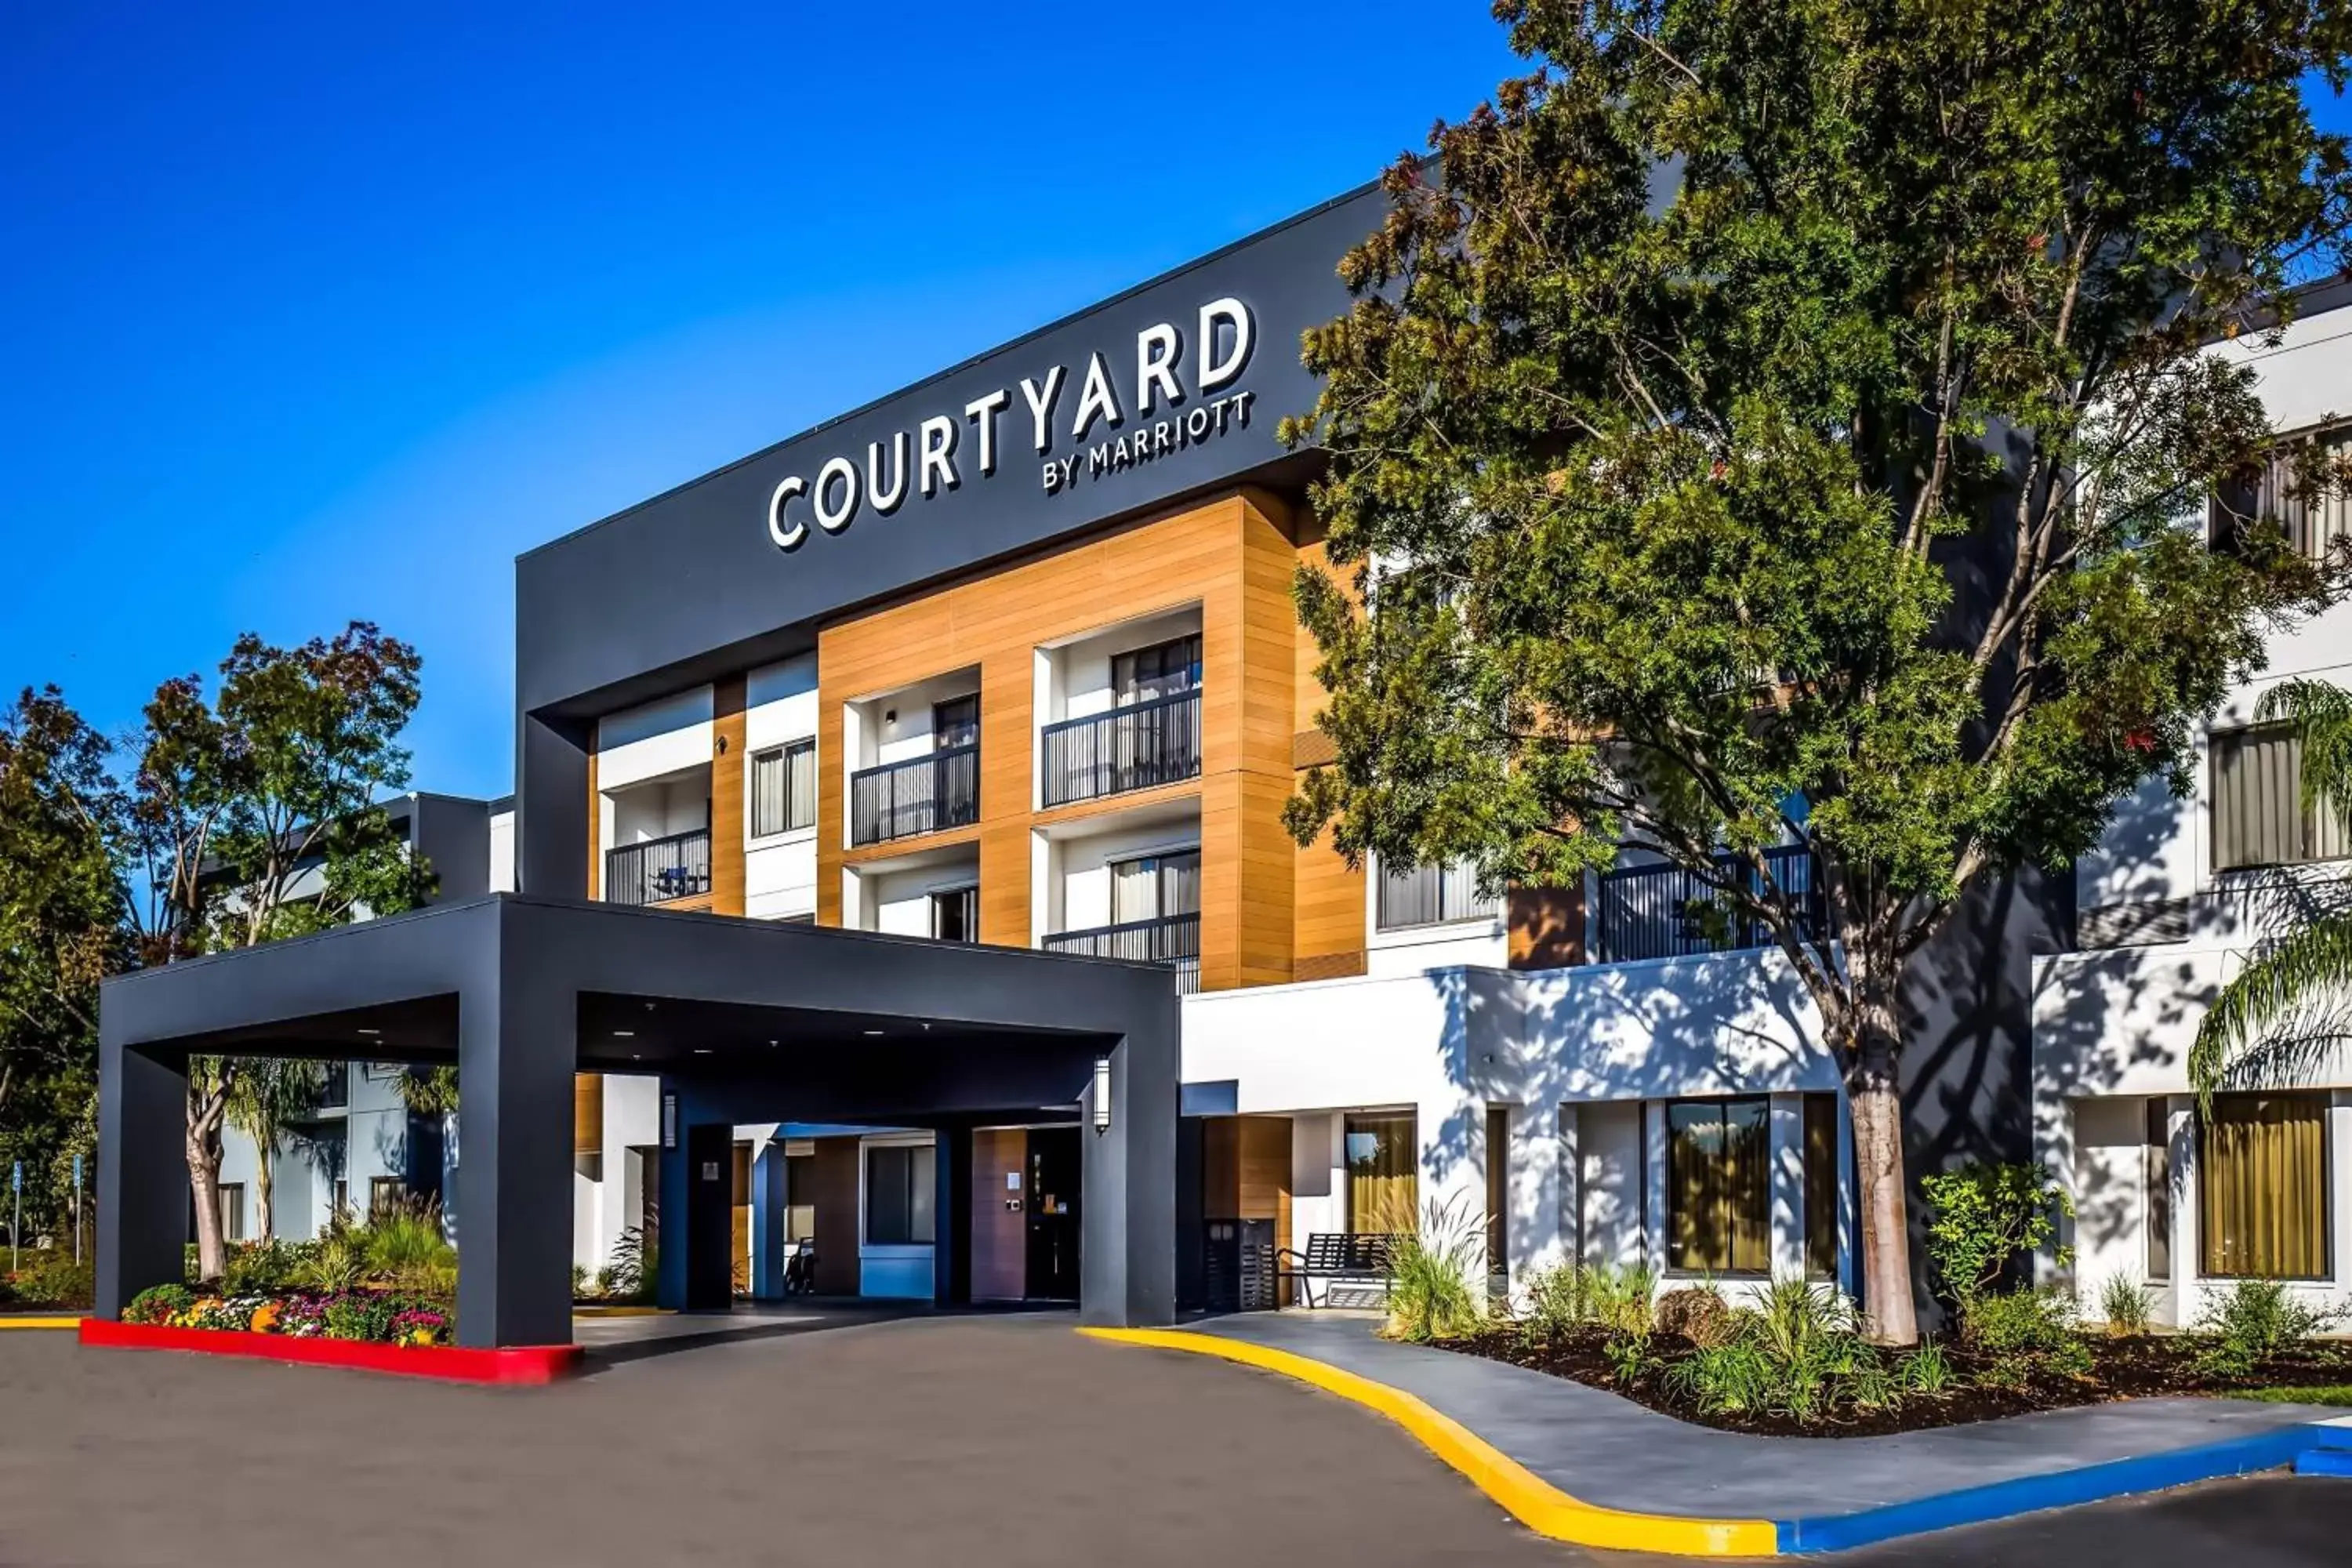 Property Building in Courtyard by Marriott Livermore